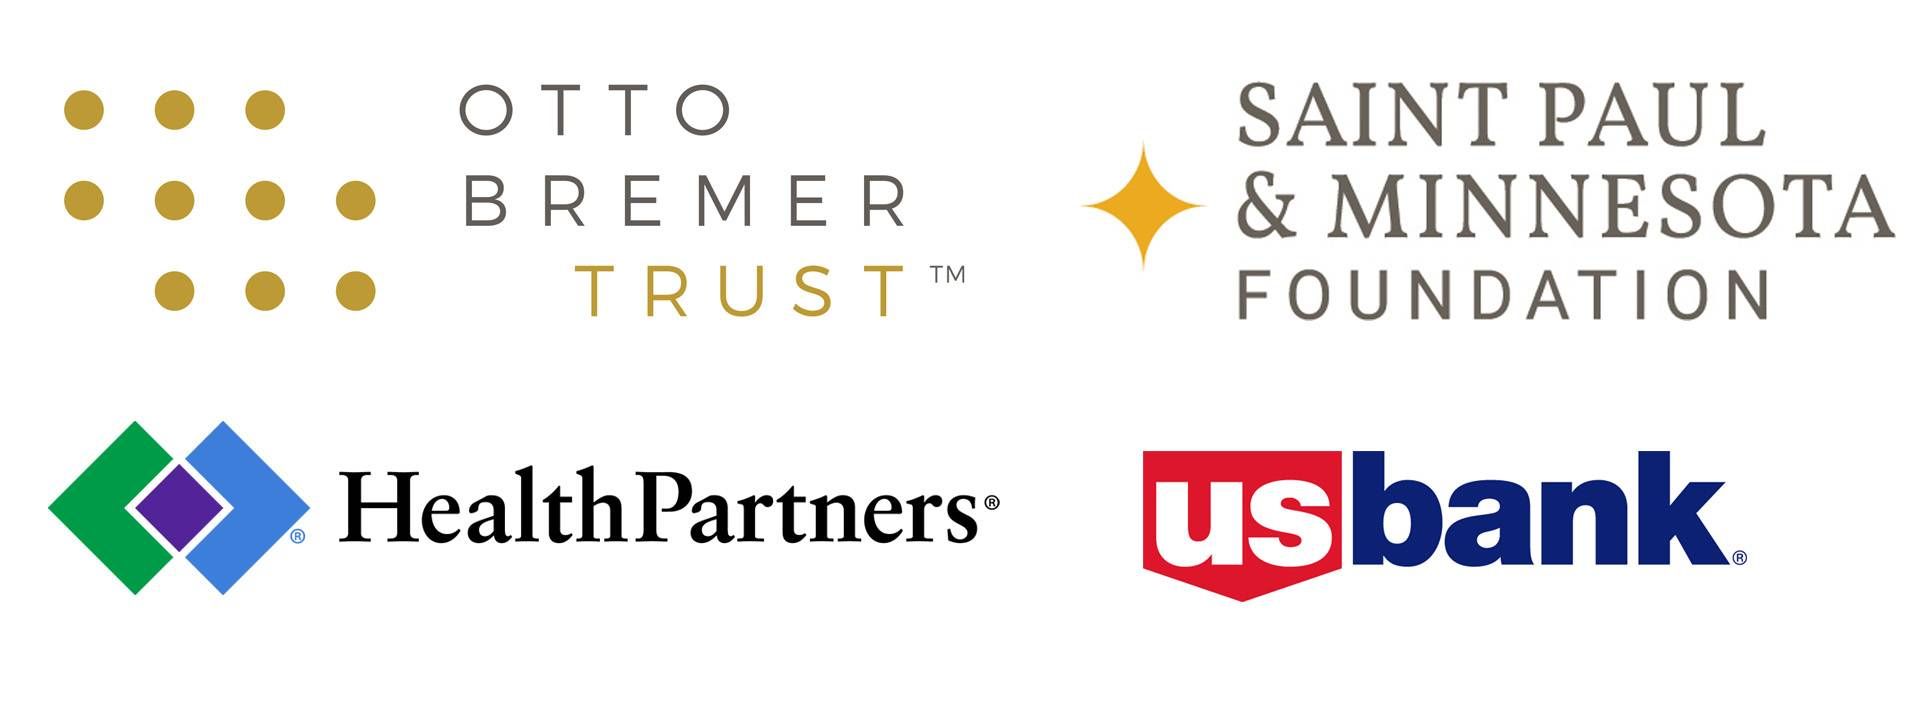 Logos for the Otto Bremer Trust, Saint Paul & Minnesota Foundation, Health Partners and US Bank.